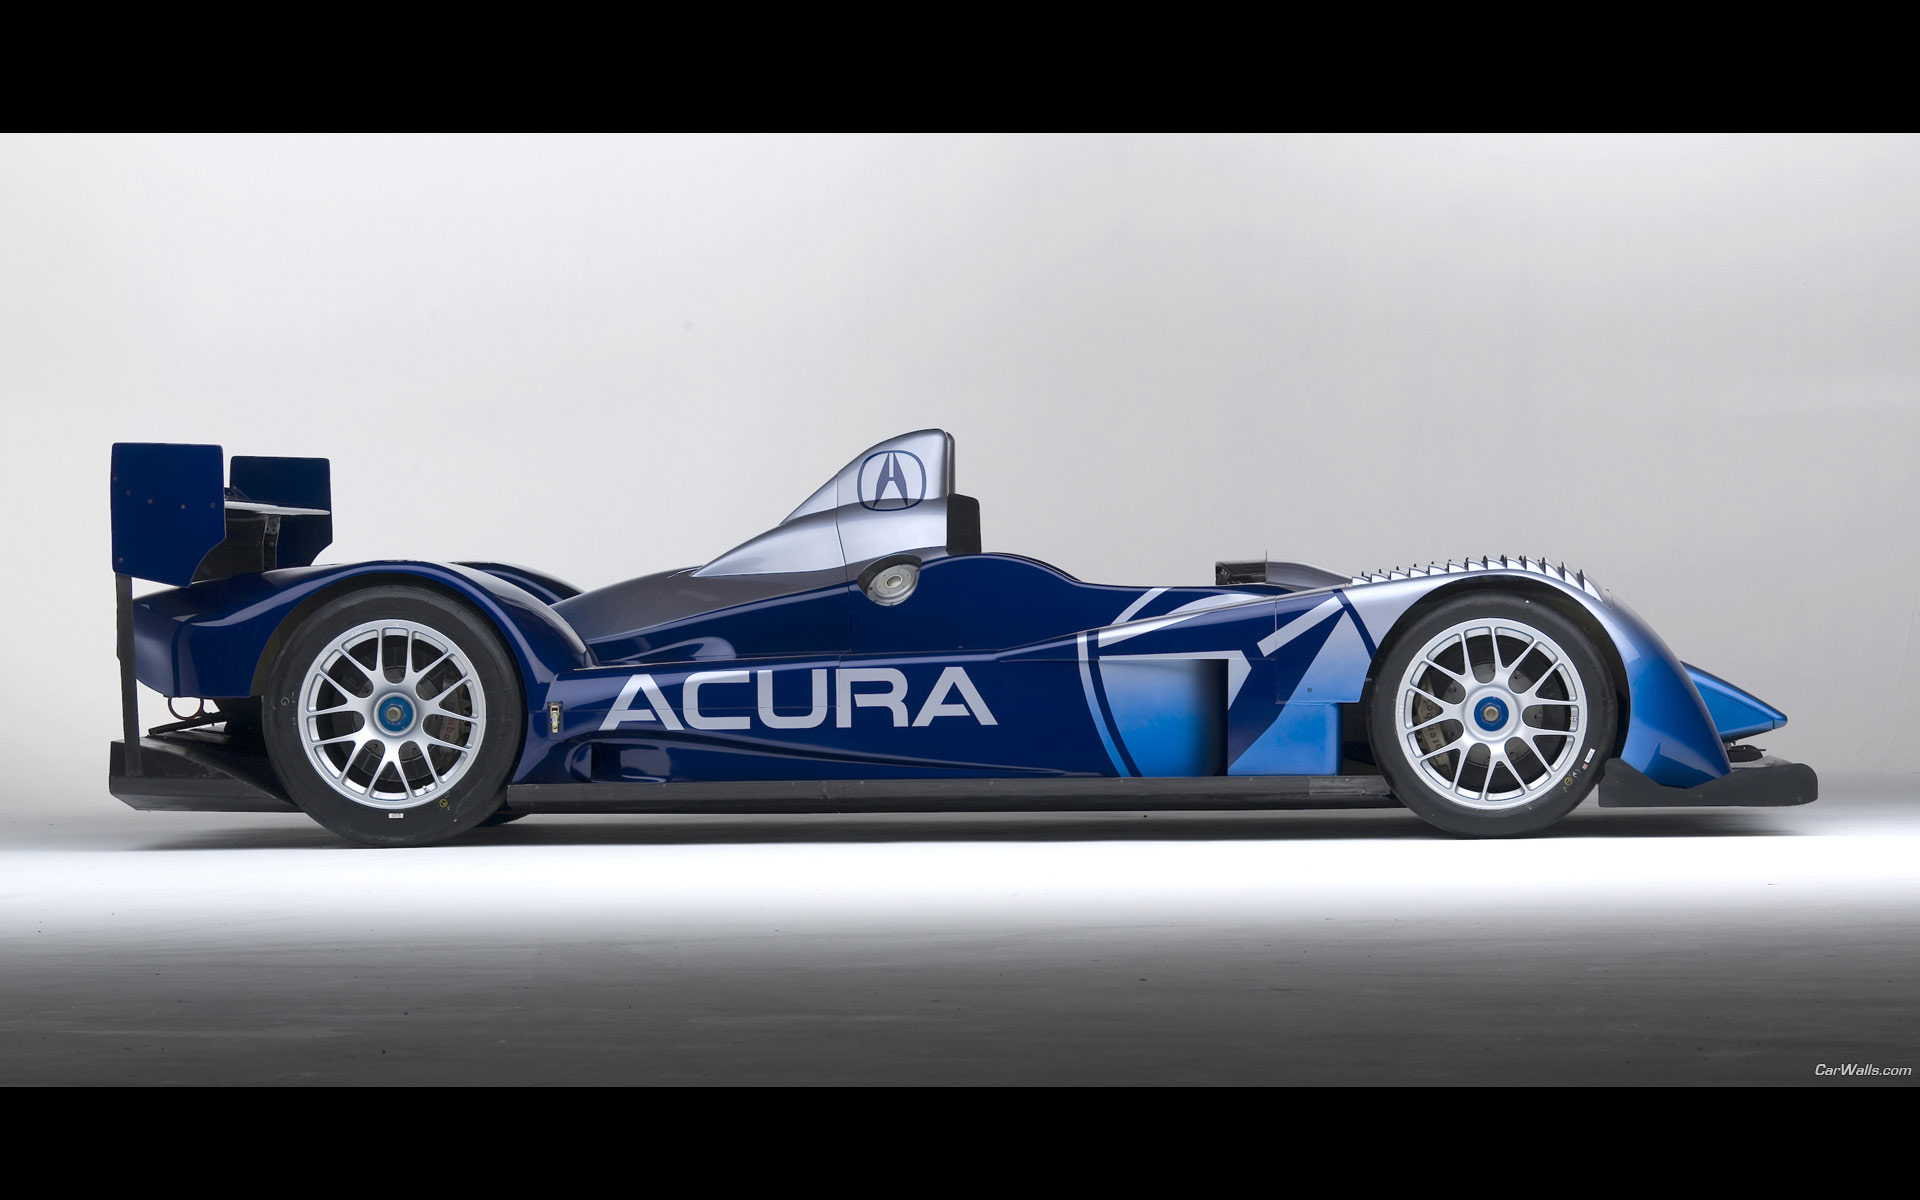 Download HQ Acura American Le Mans Series Concept Car side Acura wallpaper / 1920x1200